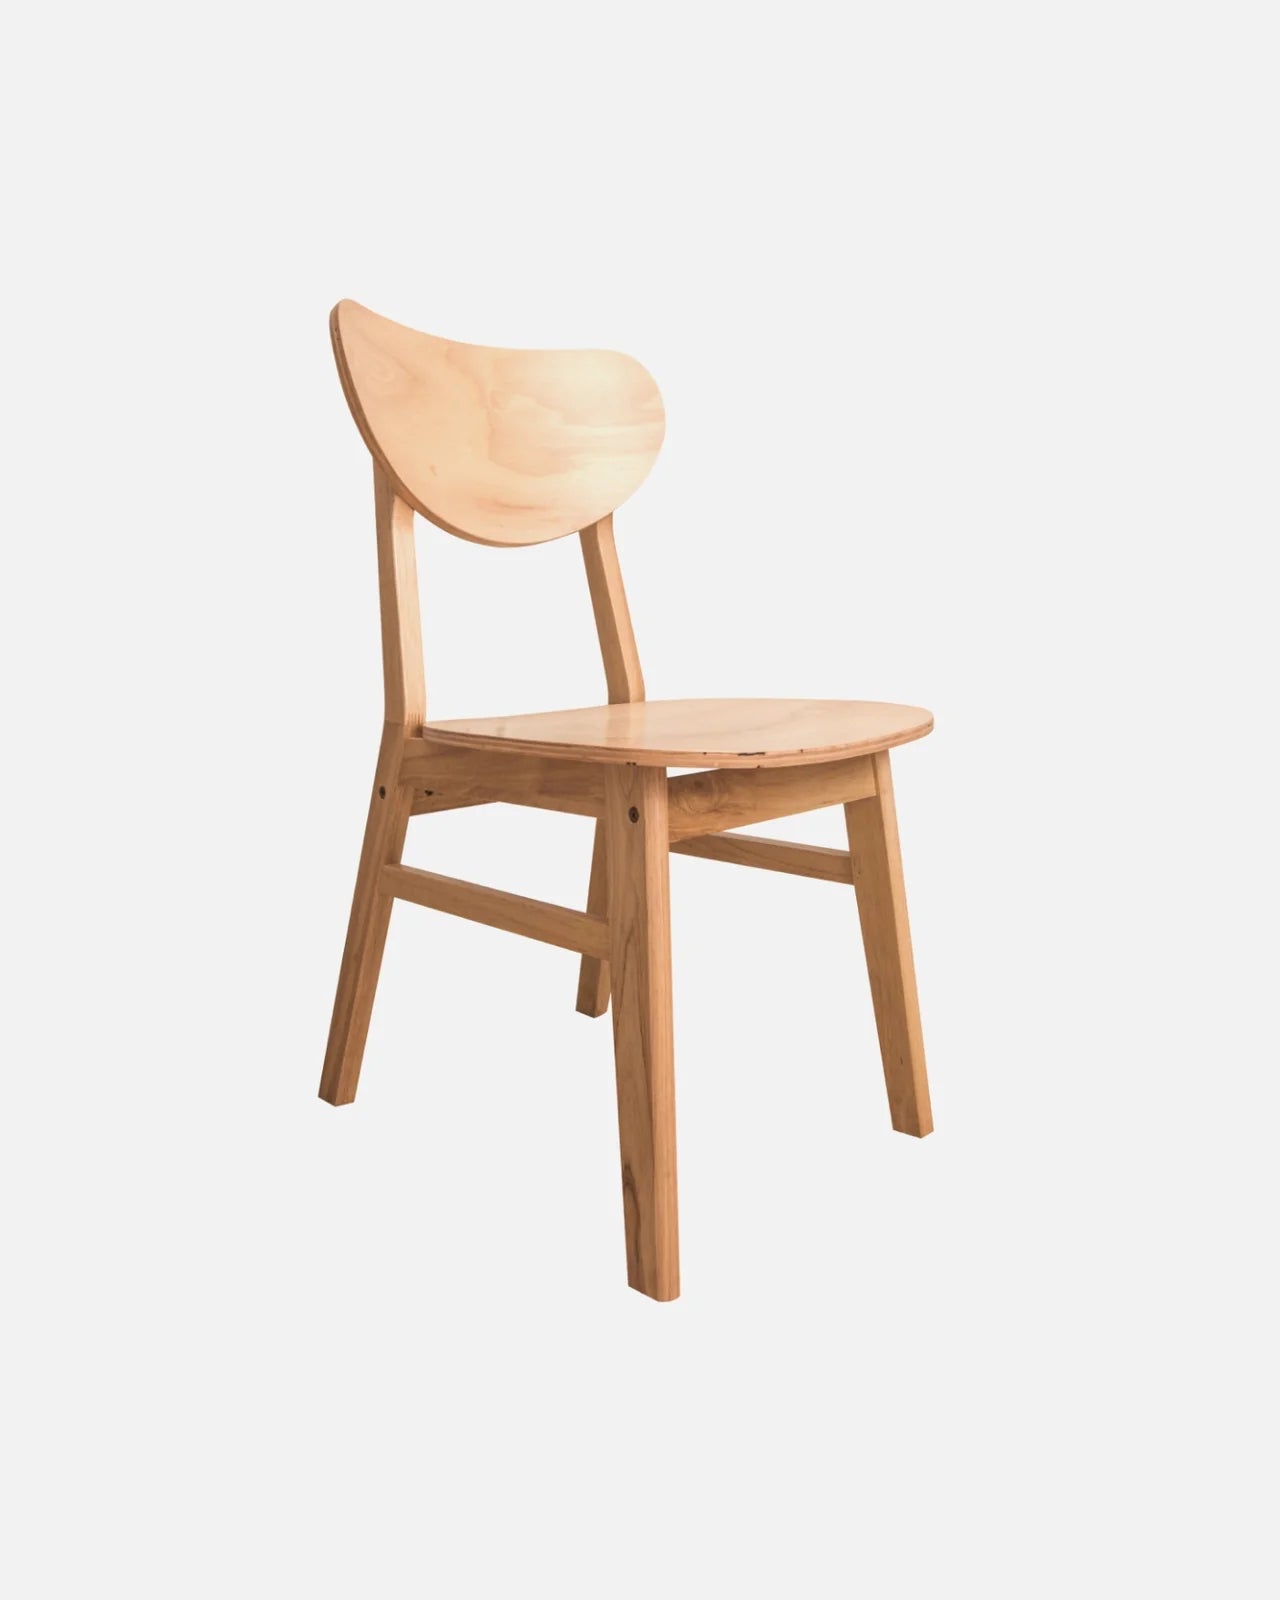 WoodSmithed Original Chair